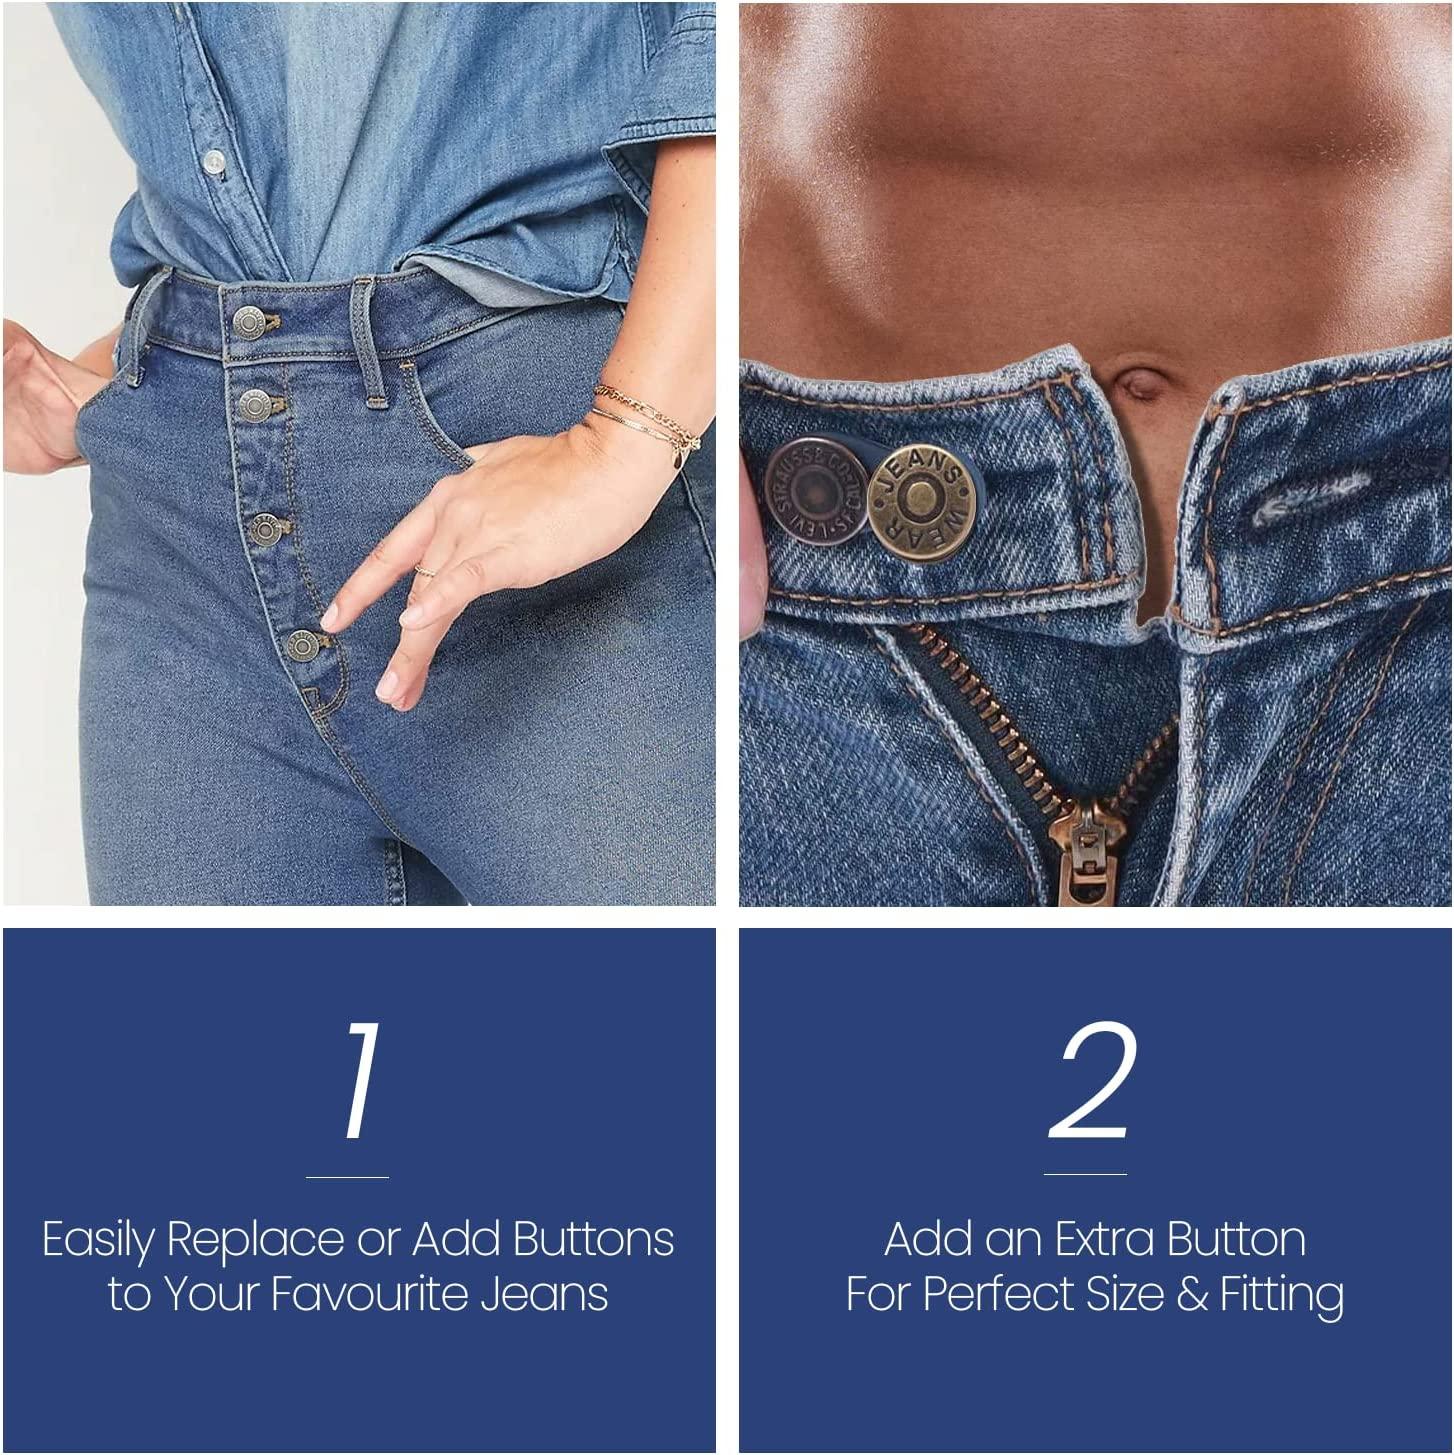 Feedee 8 Sets Jean Buttons Pins - 4 Style Button Pins for Jeans, No Sew  Jean Buttons for Loose Jeans Pants Button Tightener, Adjustable Buttons for  Jeans Too Big Snap Tack Jeans Button Replacement